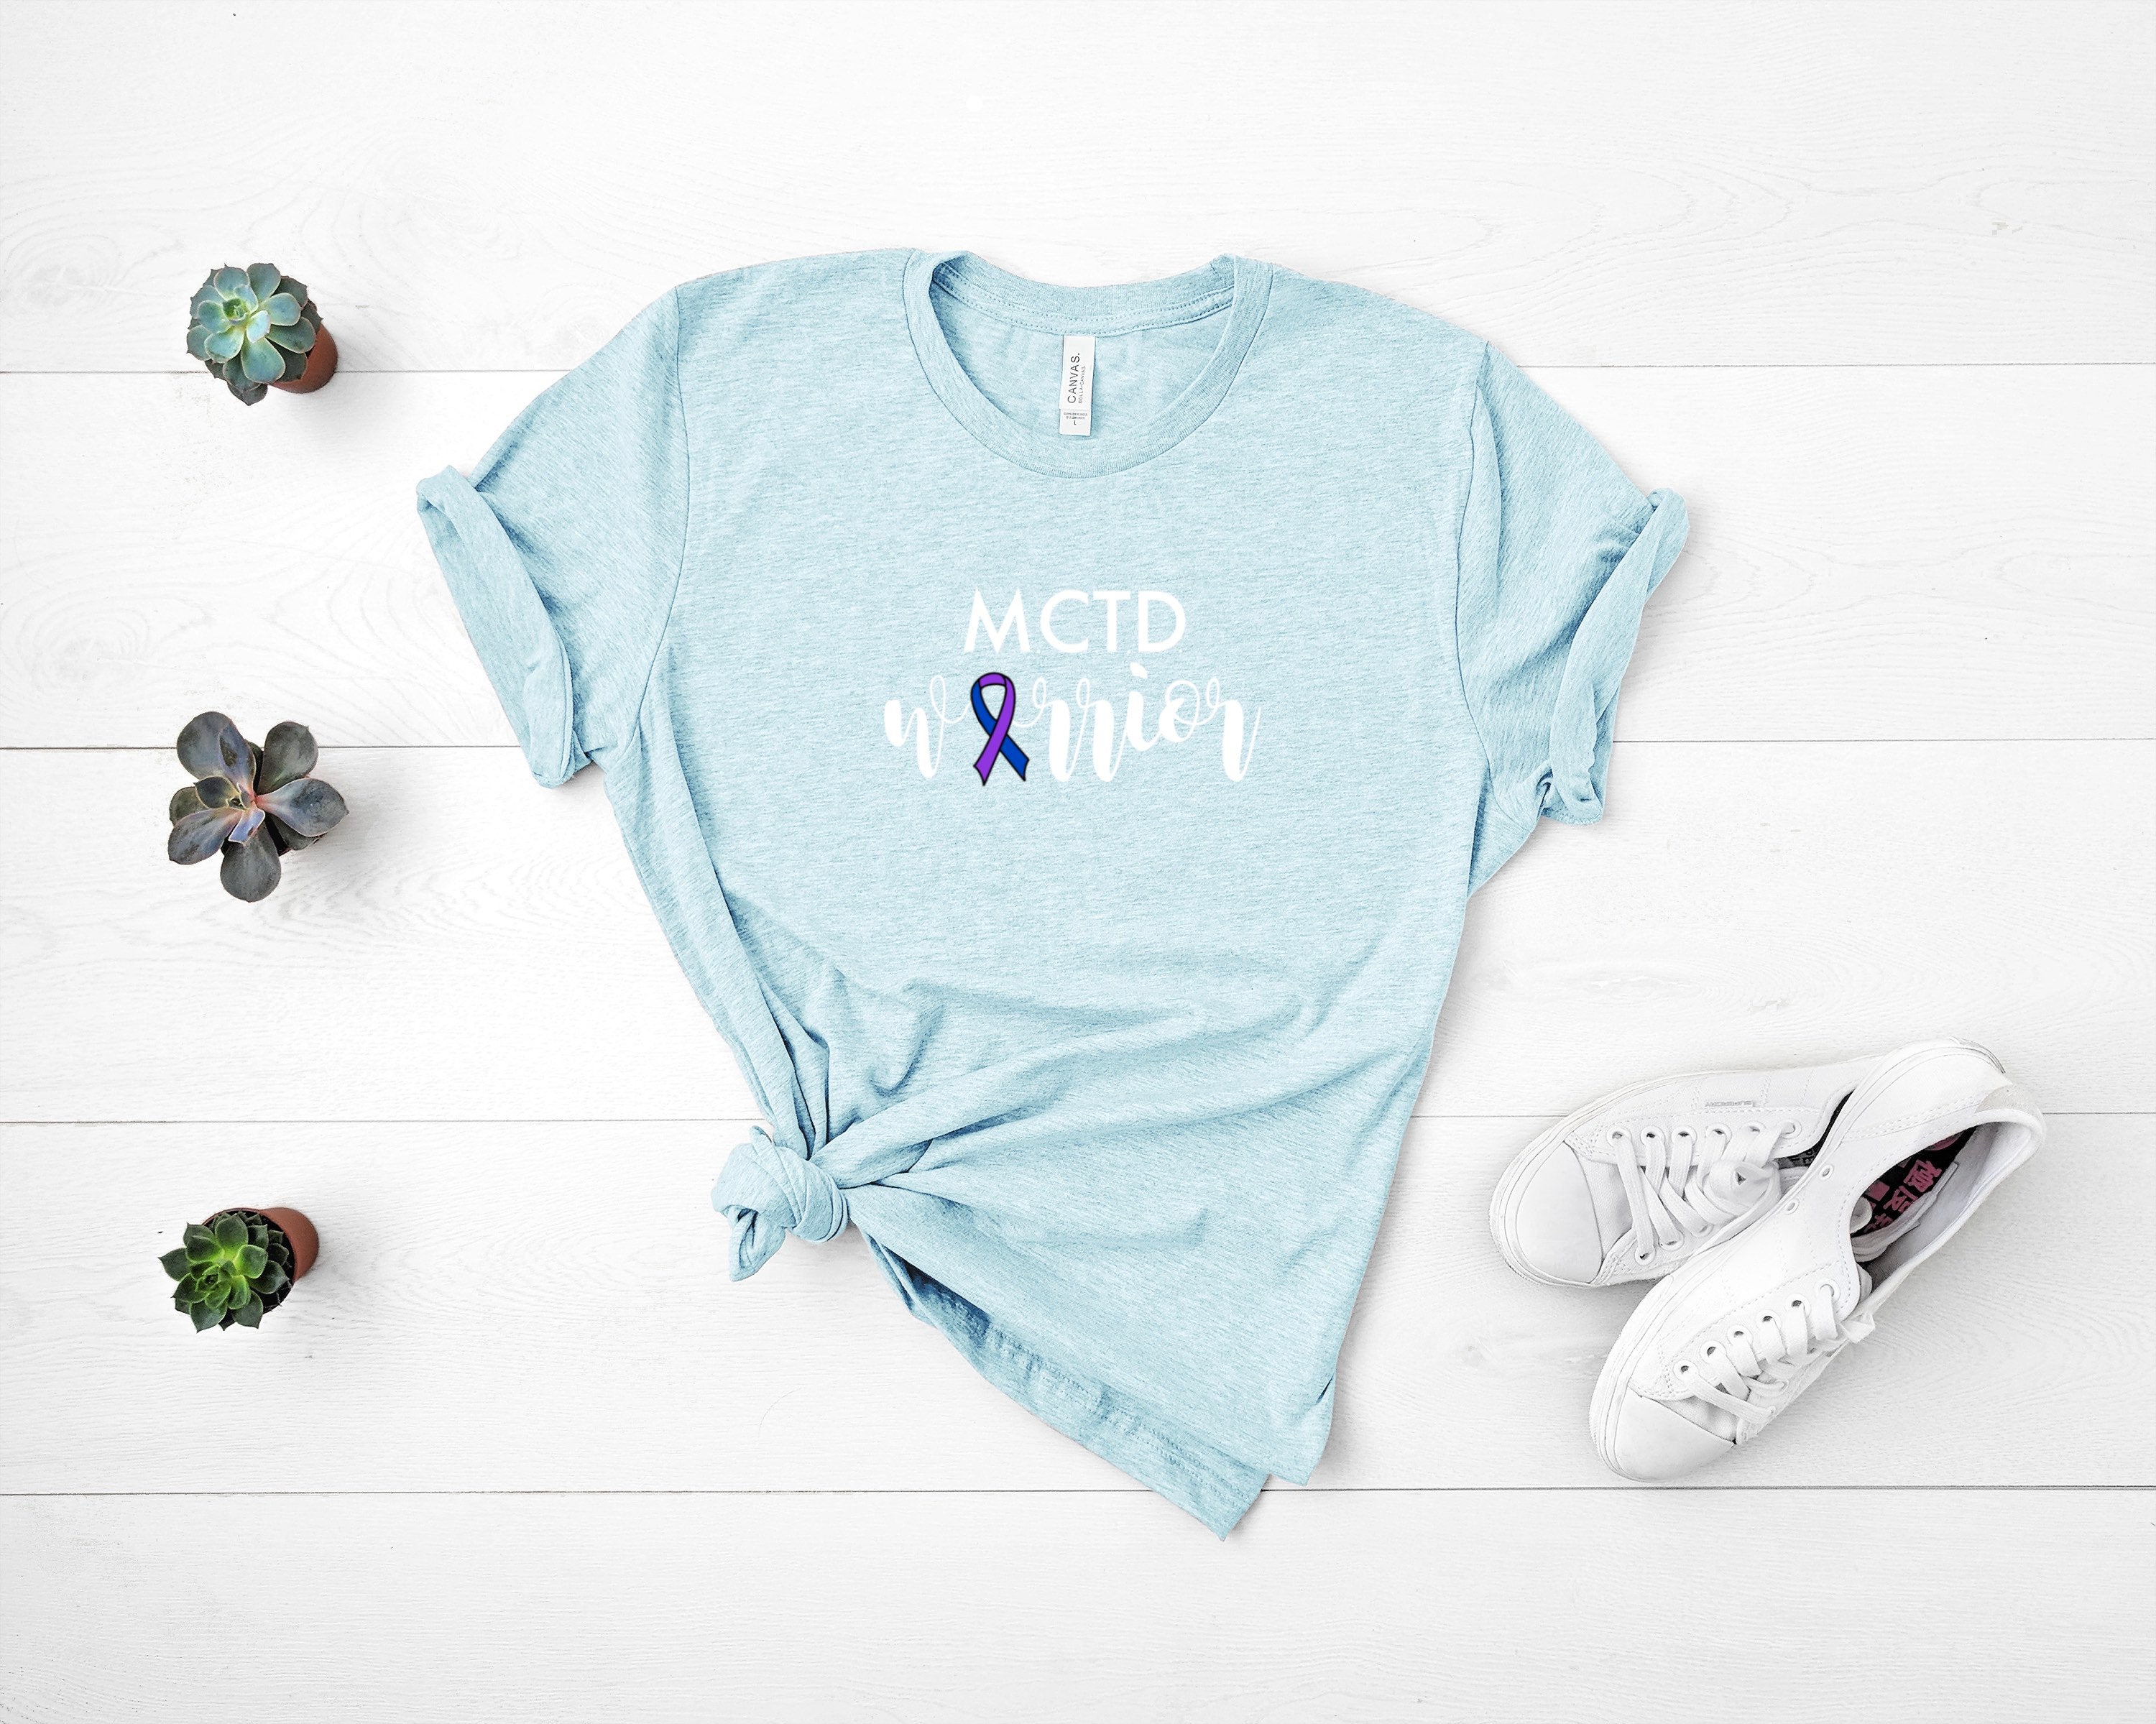 MCTD Warrior T-Shirt, mixed connective tissue disease